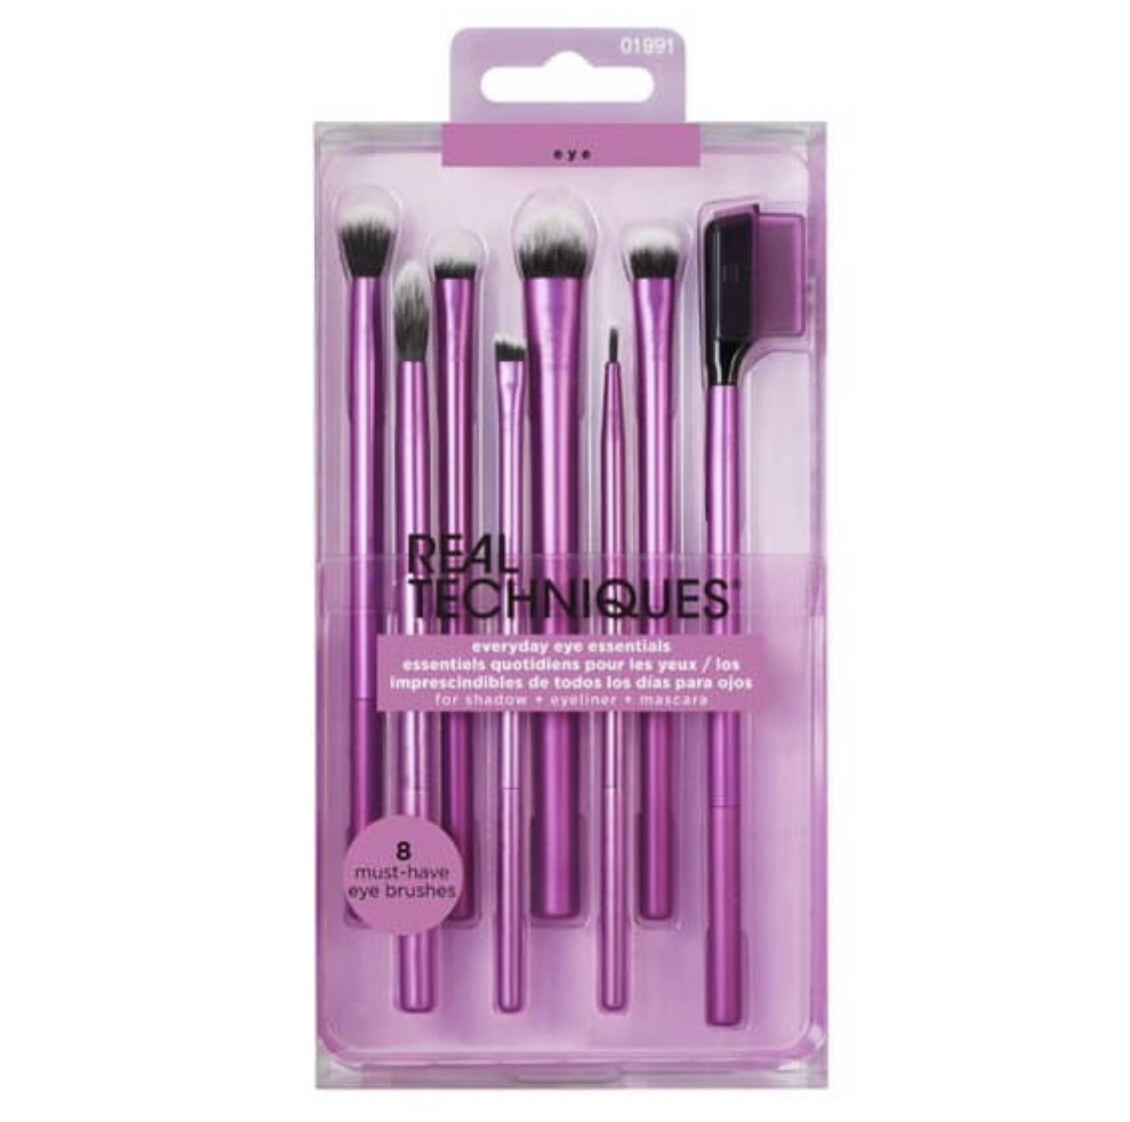 Real Techniques - Everyday Eye Essentials Makeup Brush Kit